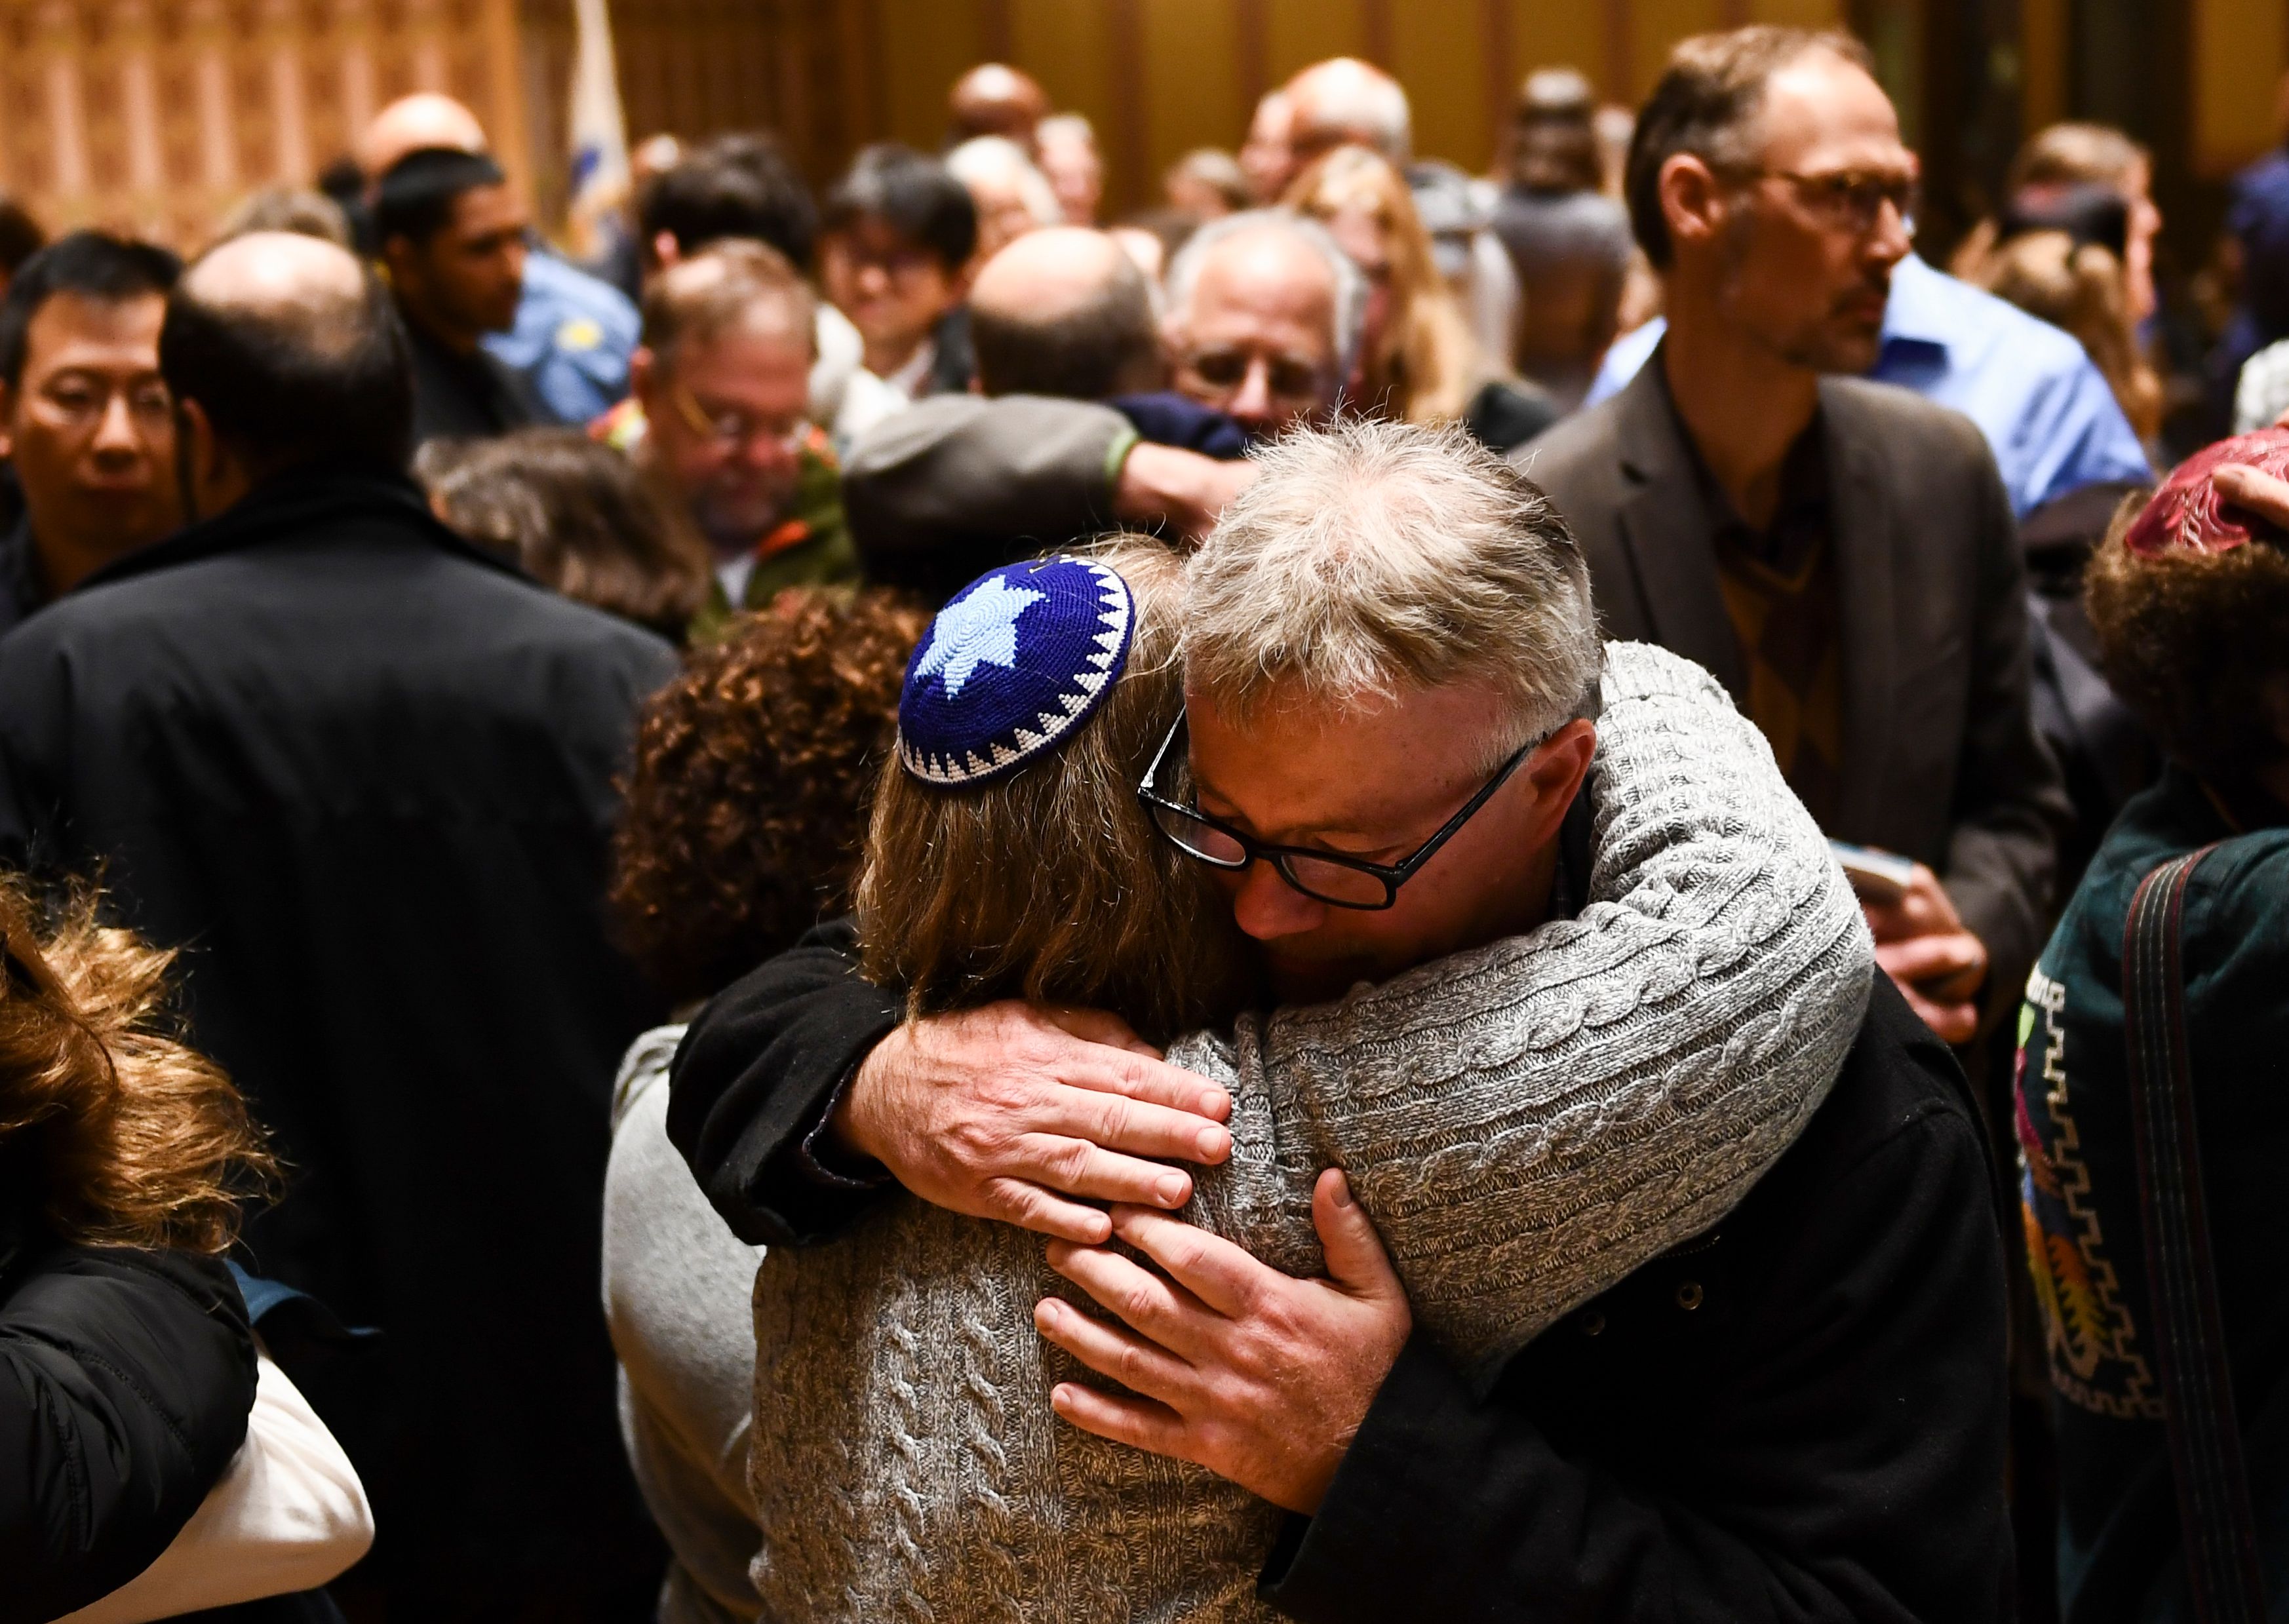 People hug after a vigil, to remember the victims of the shooting at the Tree of Life synagogue the day before, at the Allegheny County Soldiers Memorial on October 28, 2018, in Pittsburgh, Pennsylvania. (BRENDAN SMIALOWSKI/AFP/Getty Images)